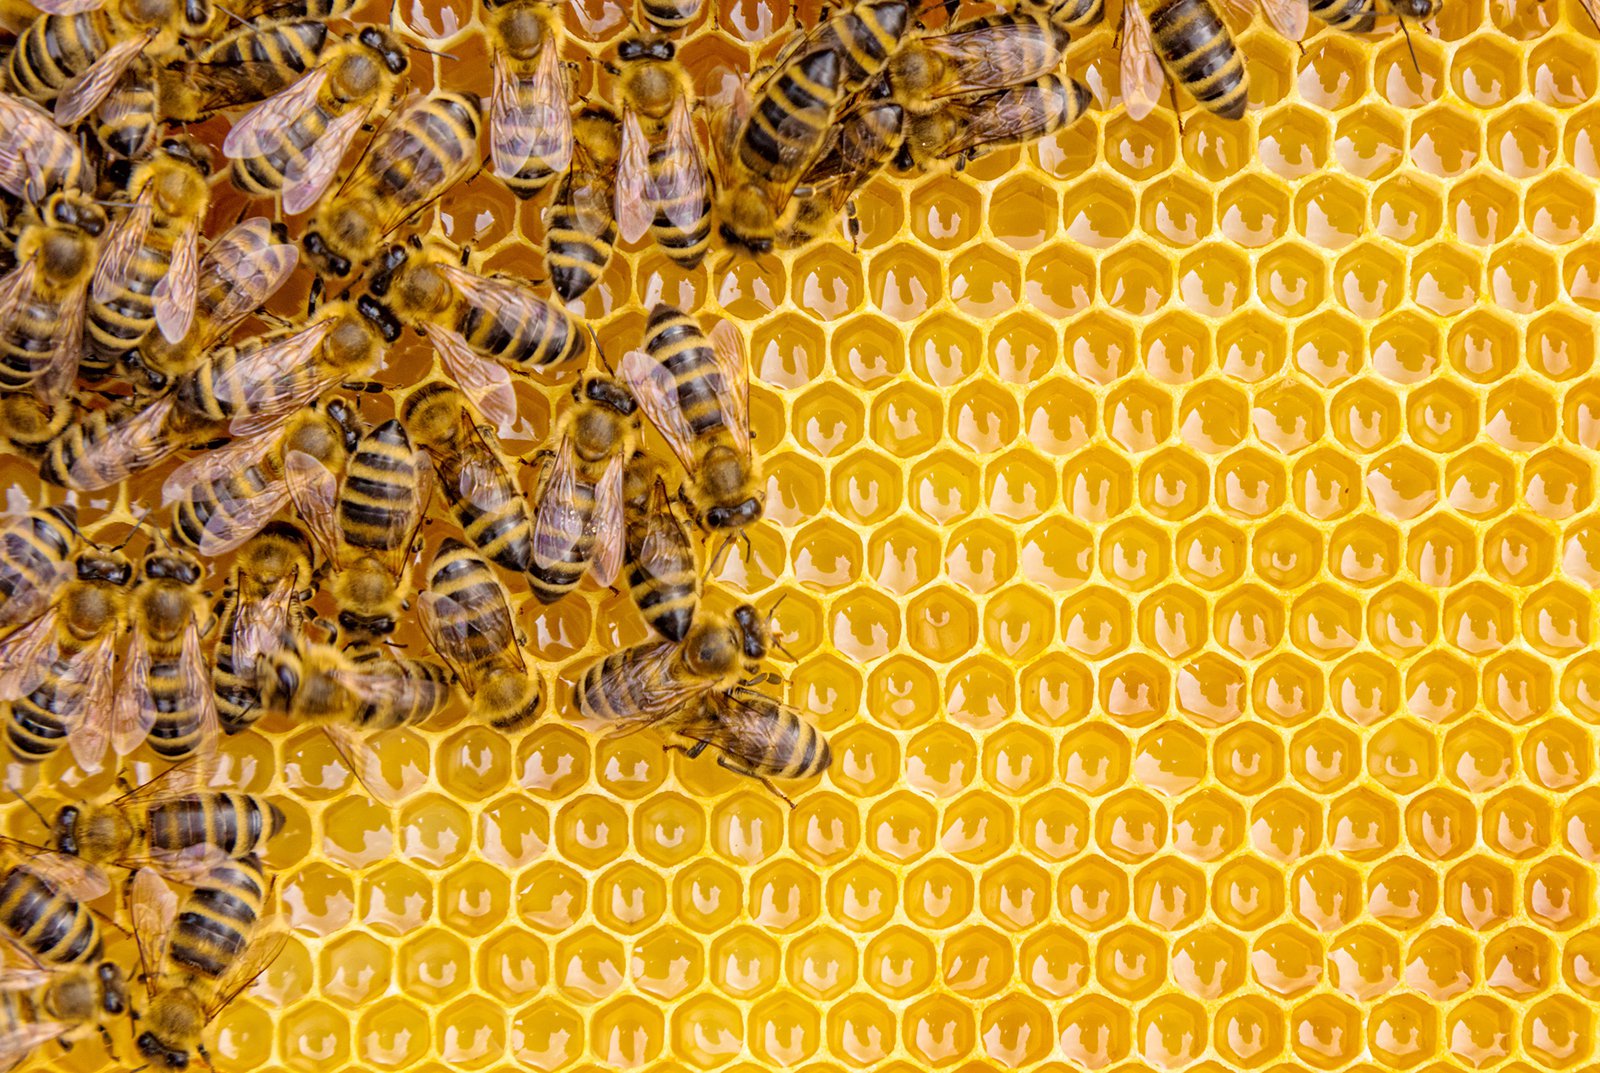 Image Showing Lots Of Honey Bees At A Single Place